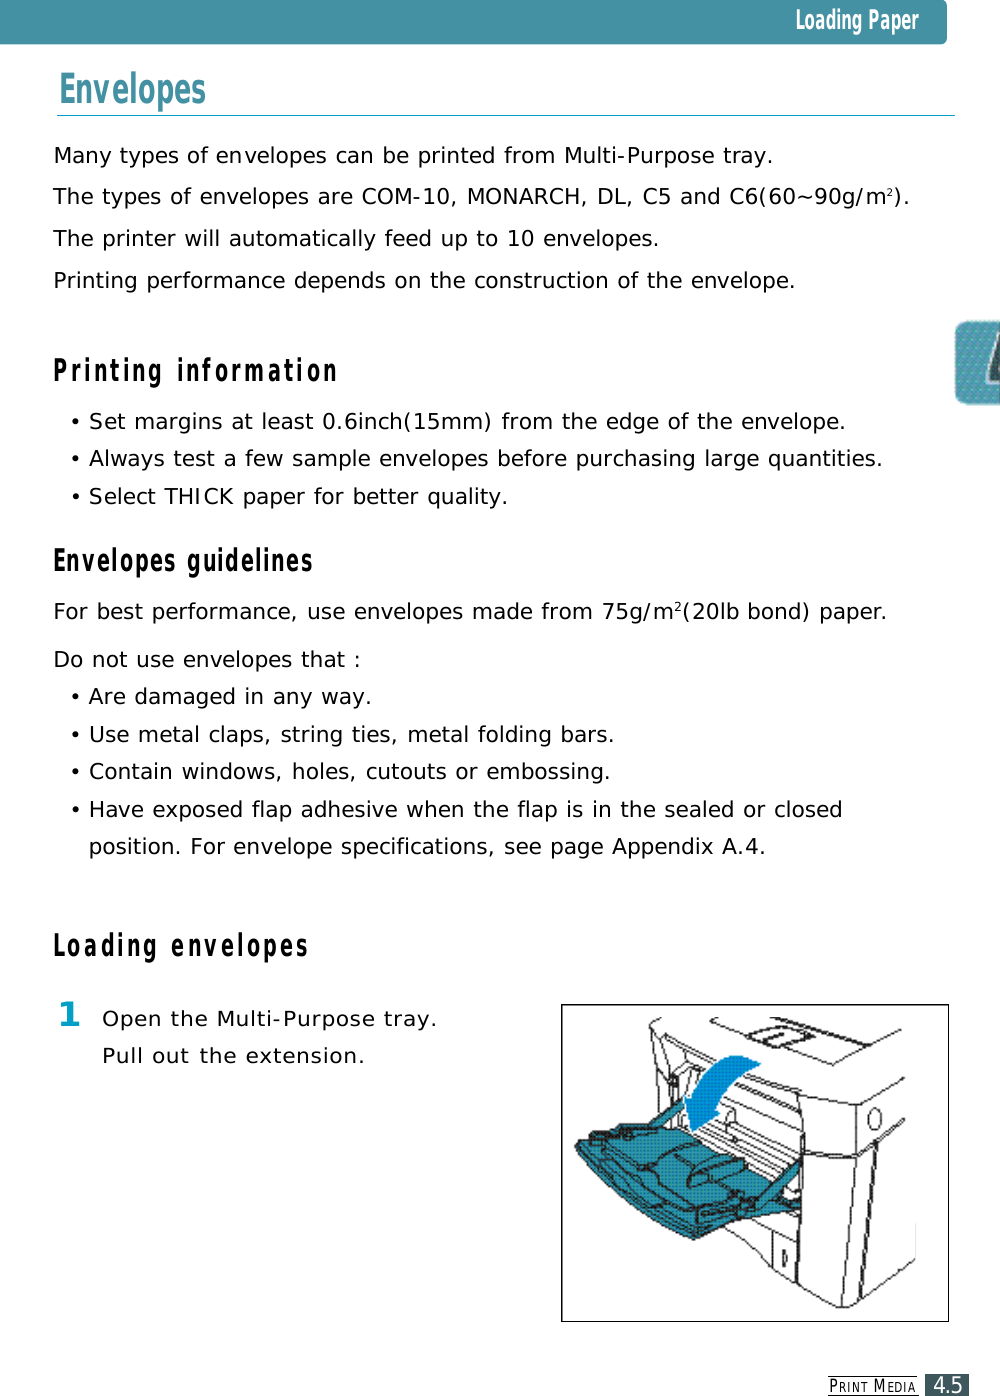 PR I N T ME D I A4.5Many types of envelopes can be printed from Multi-Purpose tray.The types of envelopes are COM-10, MONARCH, DL, C5 and C6(60~90g/m2).The printer will automatically feed up to 10 envelopes.Printing performance depends on the construction of the envelope.Printing information•Set margins at least 0.6inch(15mm) from the edge of the envelope.•Always test a few sample envelopes before purchasing large quantities.•Select THICK paper for better quality.Envelopes guidelinesFor best performance, use envelopes made from 75g/m2(20lb bond) paper.Do not use envelopes that : •Are damaged in any way.•Use metal claps, string ties, metal folding bars.•Contain windows, holes, cutouts or embossing.•Have exposed flap adhesive when the flap is in the sealed or closed position. For envelope specifications, see page Appendix A.4. 1Open the Multi-Purpose tray. Pull out the extension.EnvelopesLoading envelopesLoading Paper